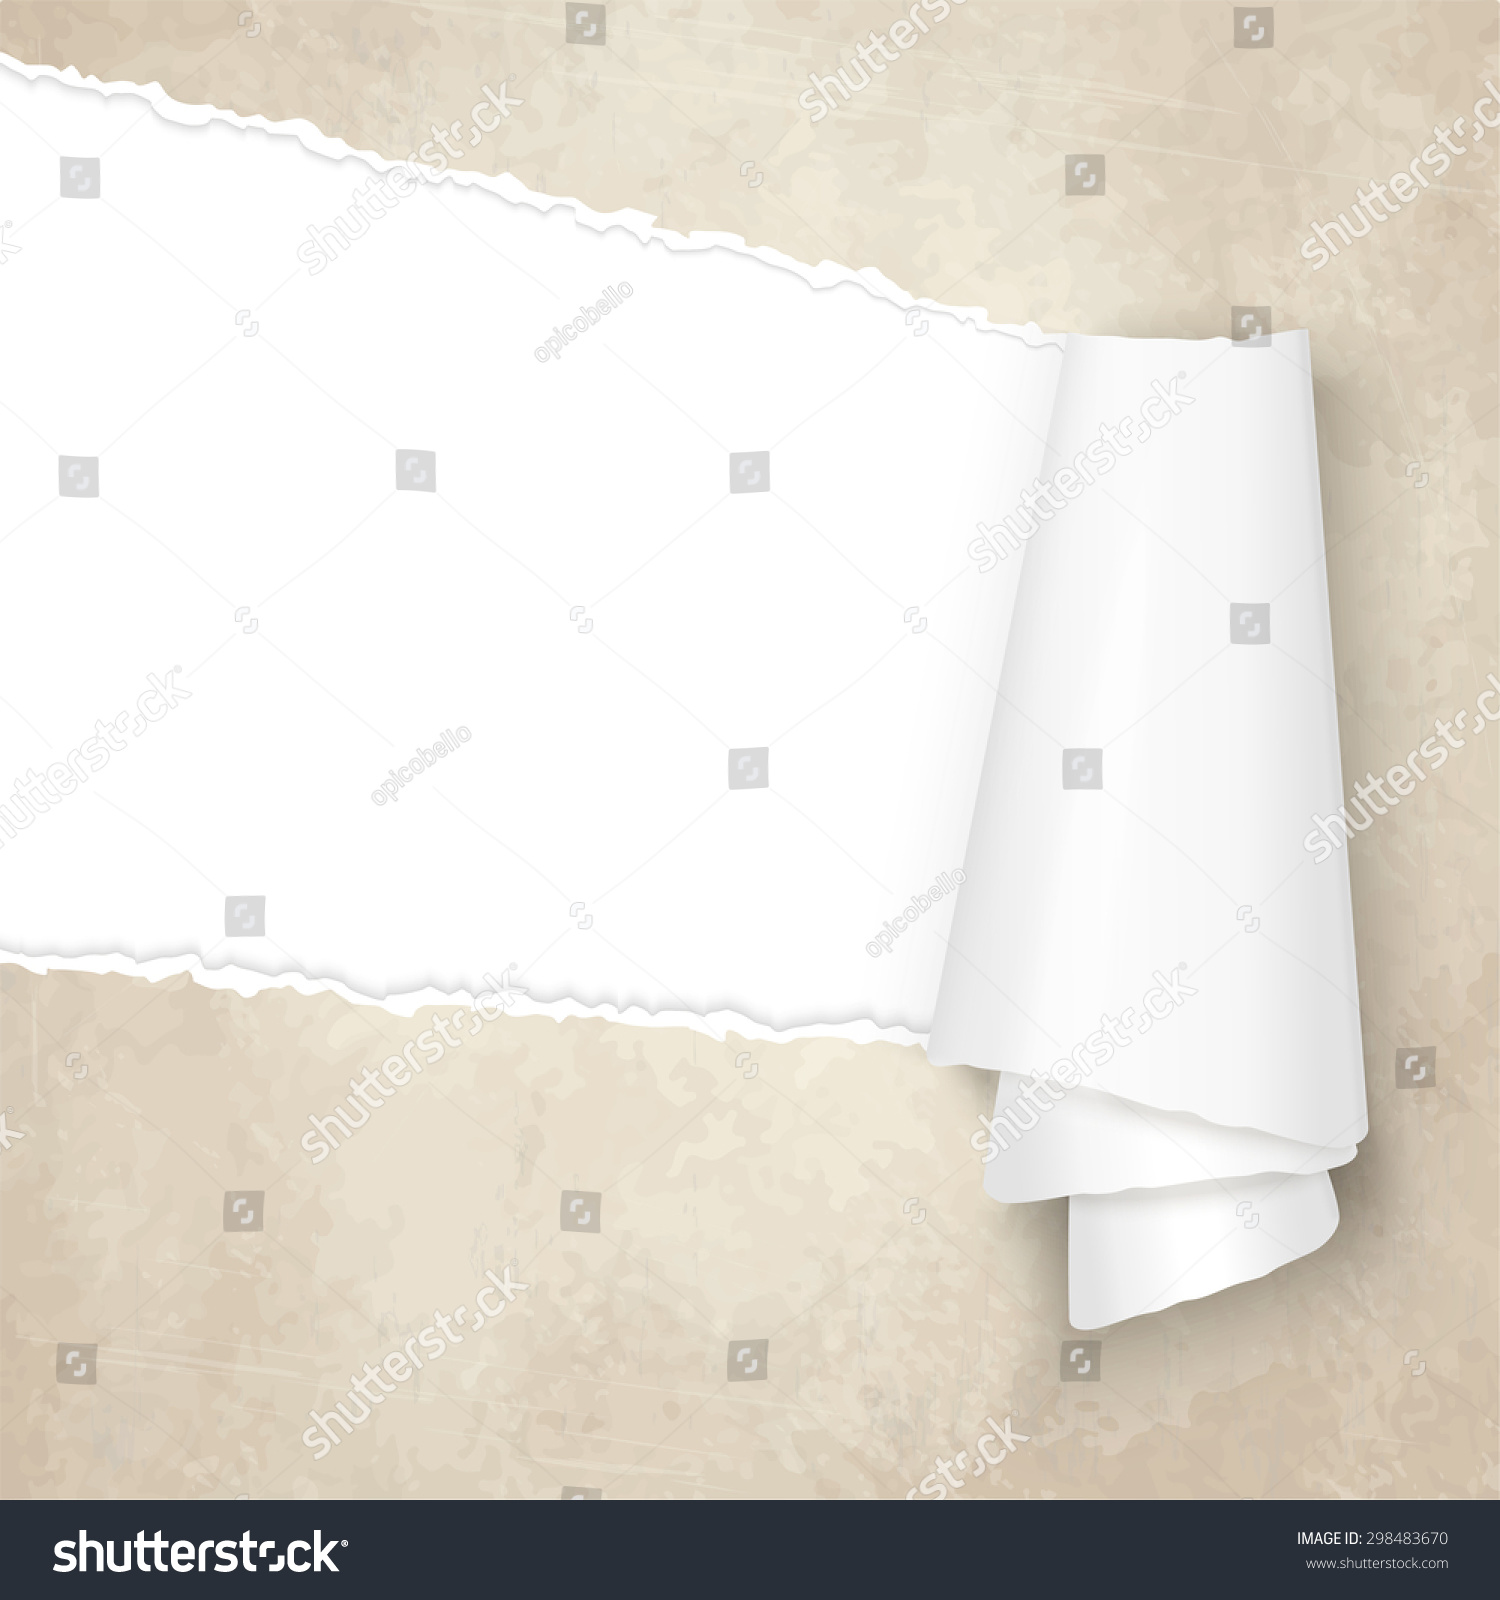 Vector Ripped Open Old Vintage Paper Stock Vector 298483670 ...